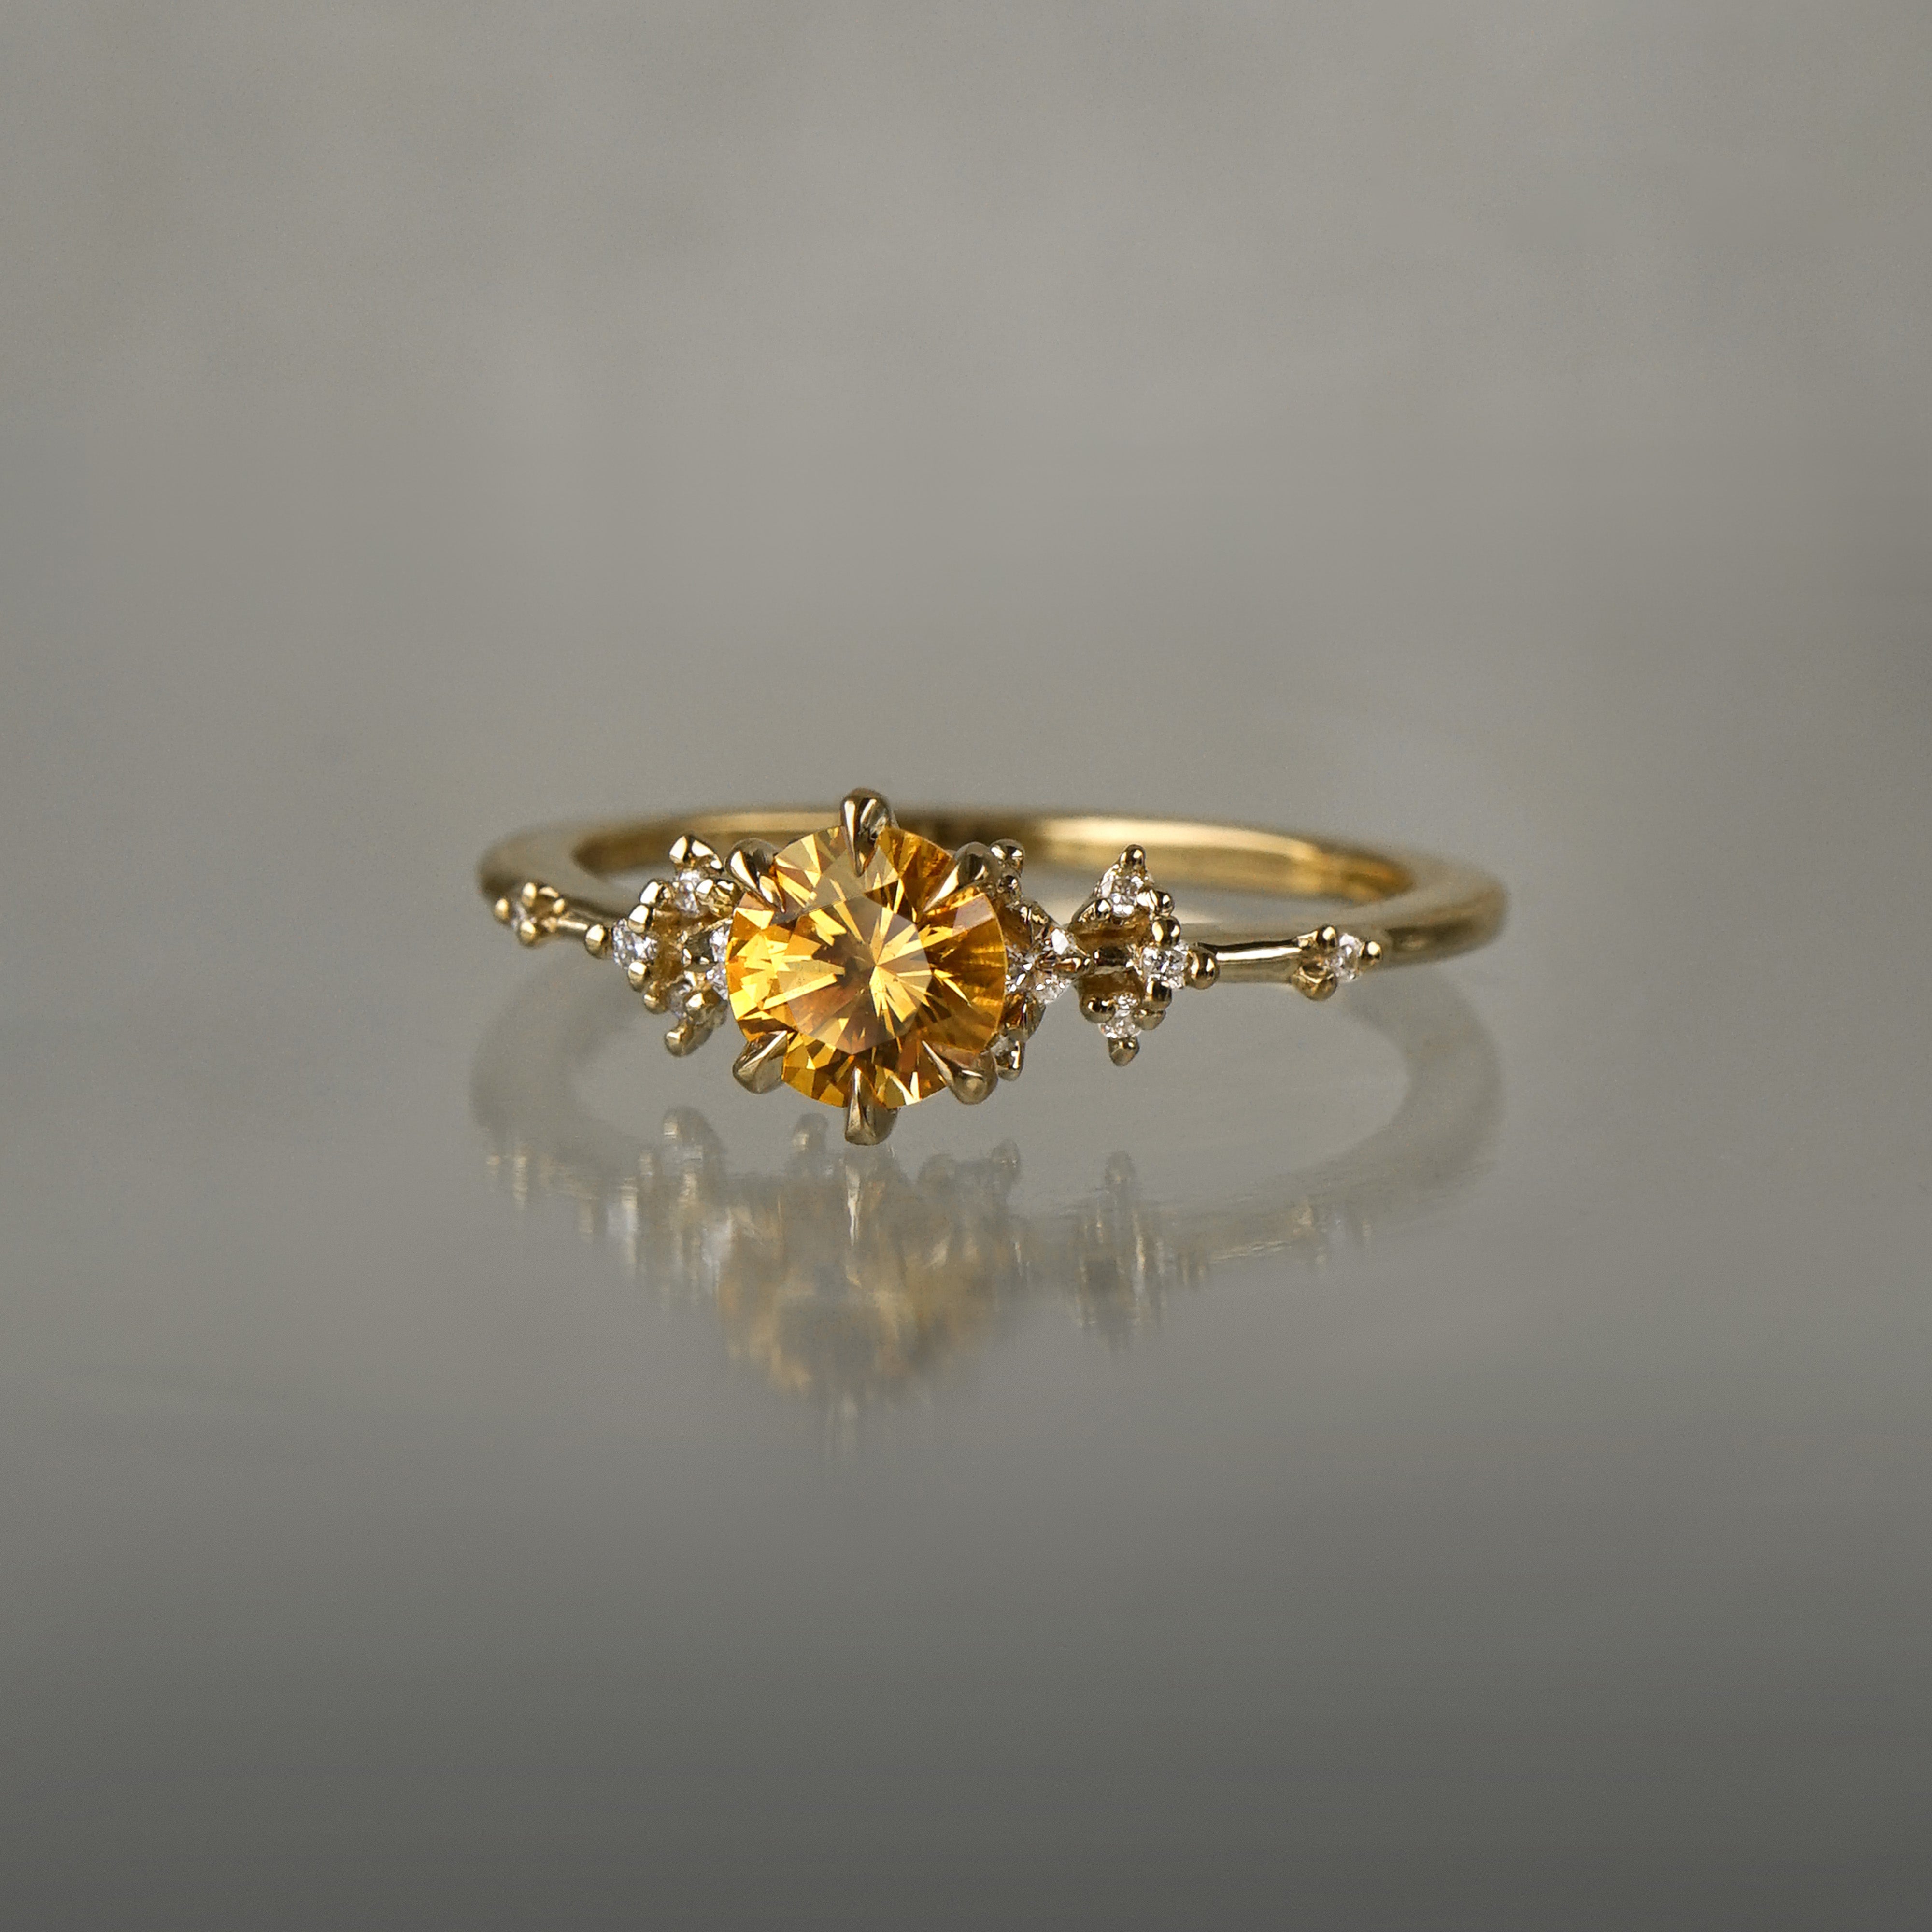 A one of a kind 18k yellow gold Water Lily engagement ring by Laurie Fleming Jewellery with a bright golden yellow round Montana sapphire centre with clusters of diamonds on the band. The ring is situated on a medium grey background.